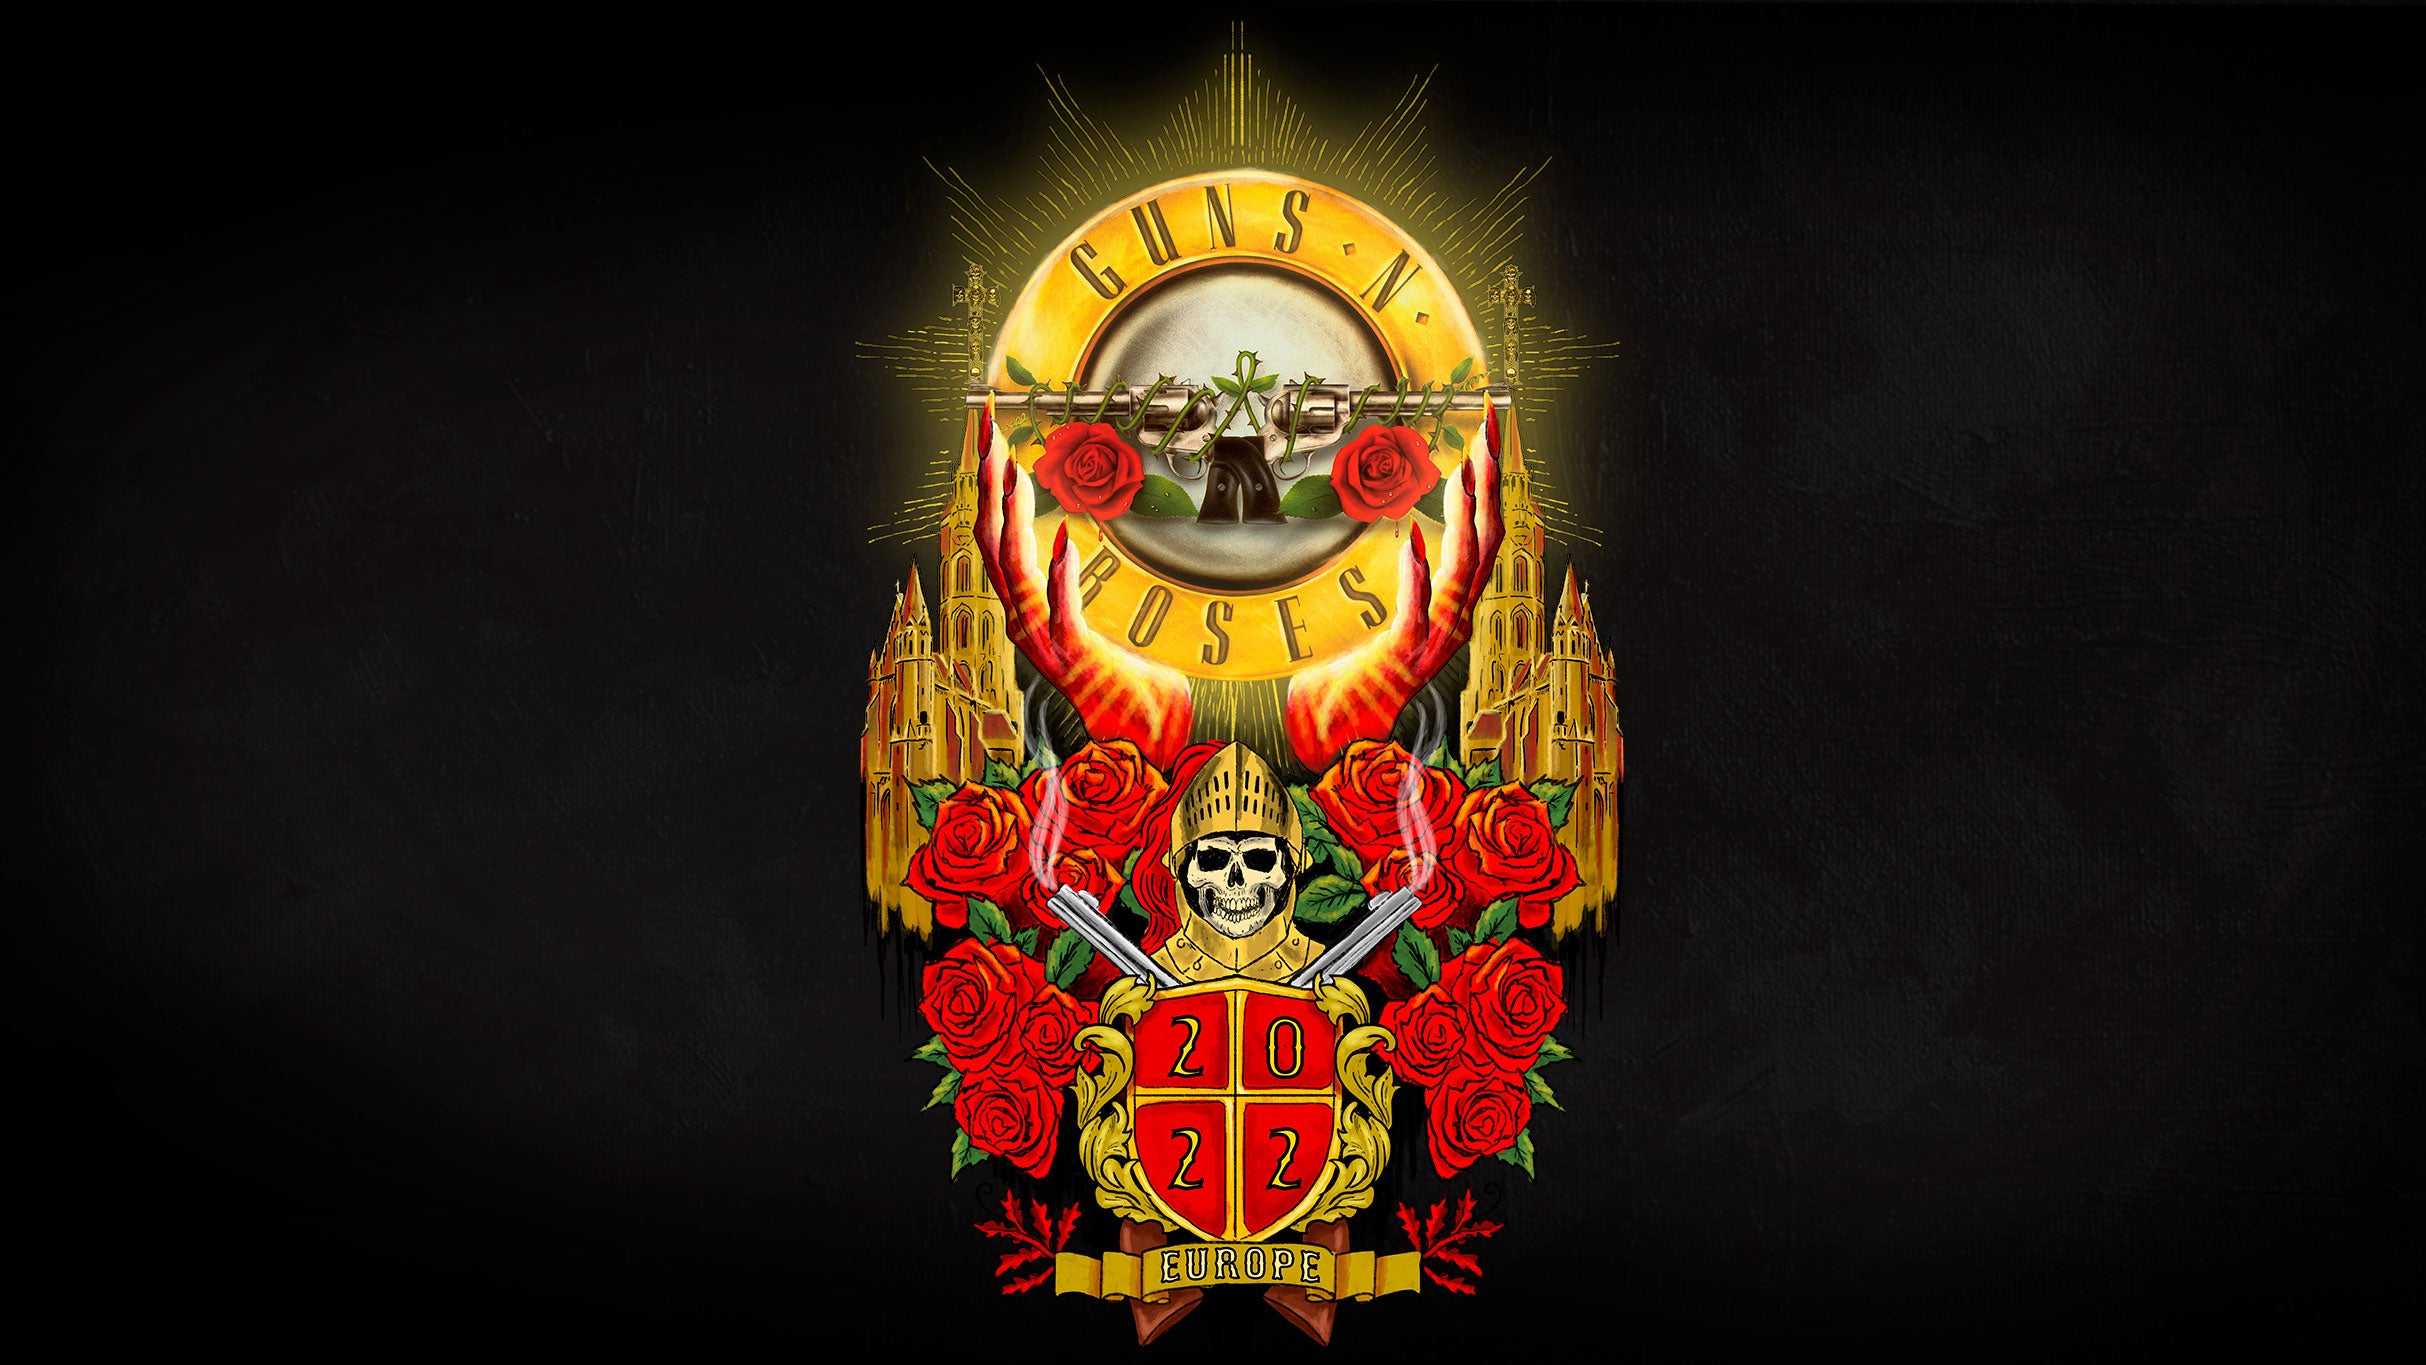 THE LEGENDARY ROCK BAND GUNS N’ ROSES RETURNS TO POLAND IN 2022!